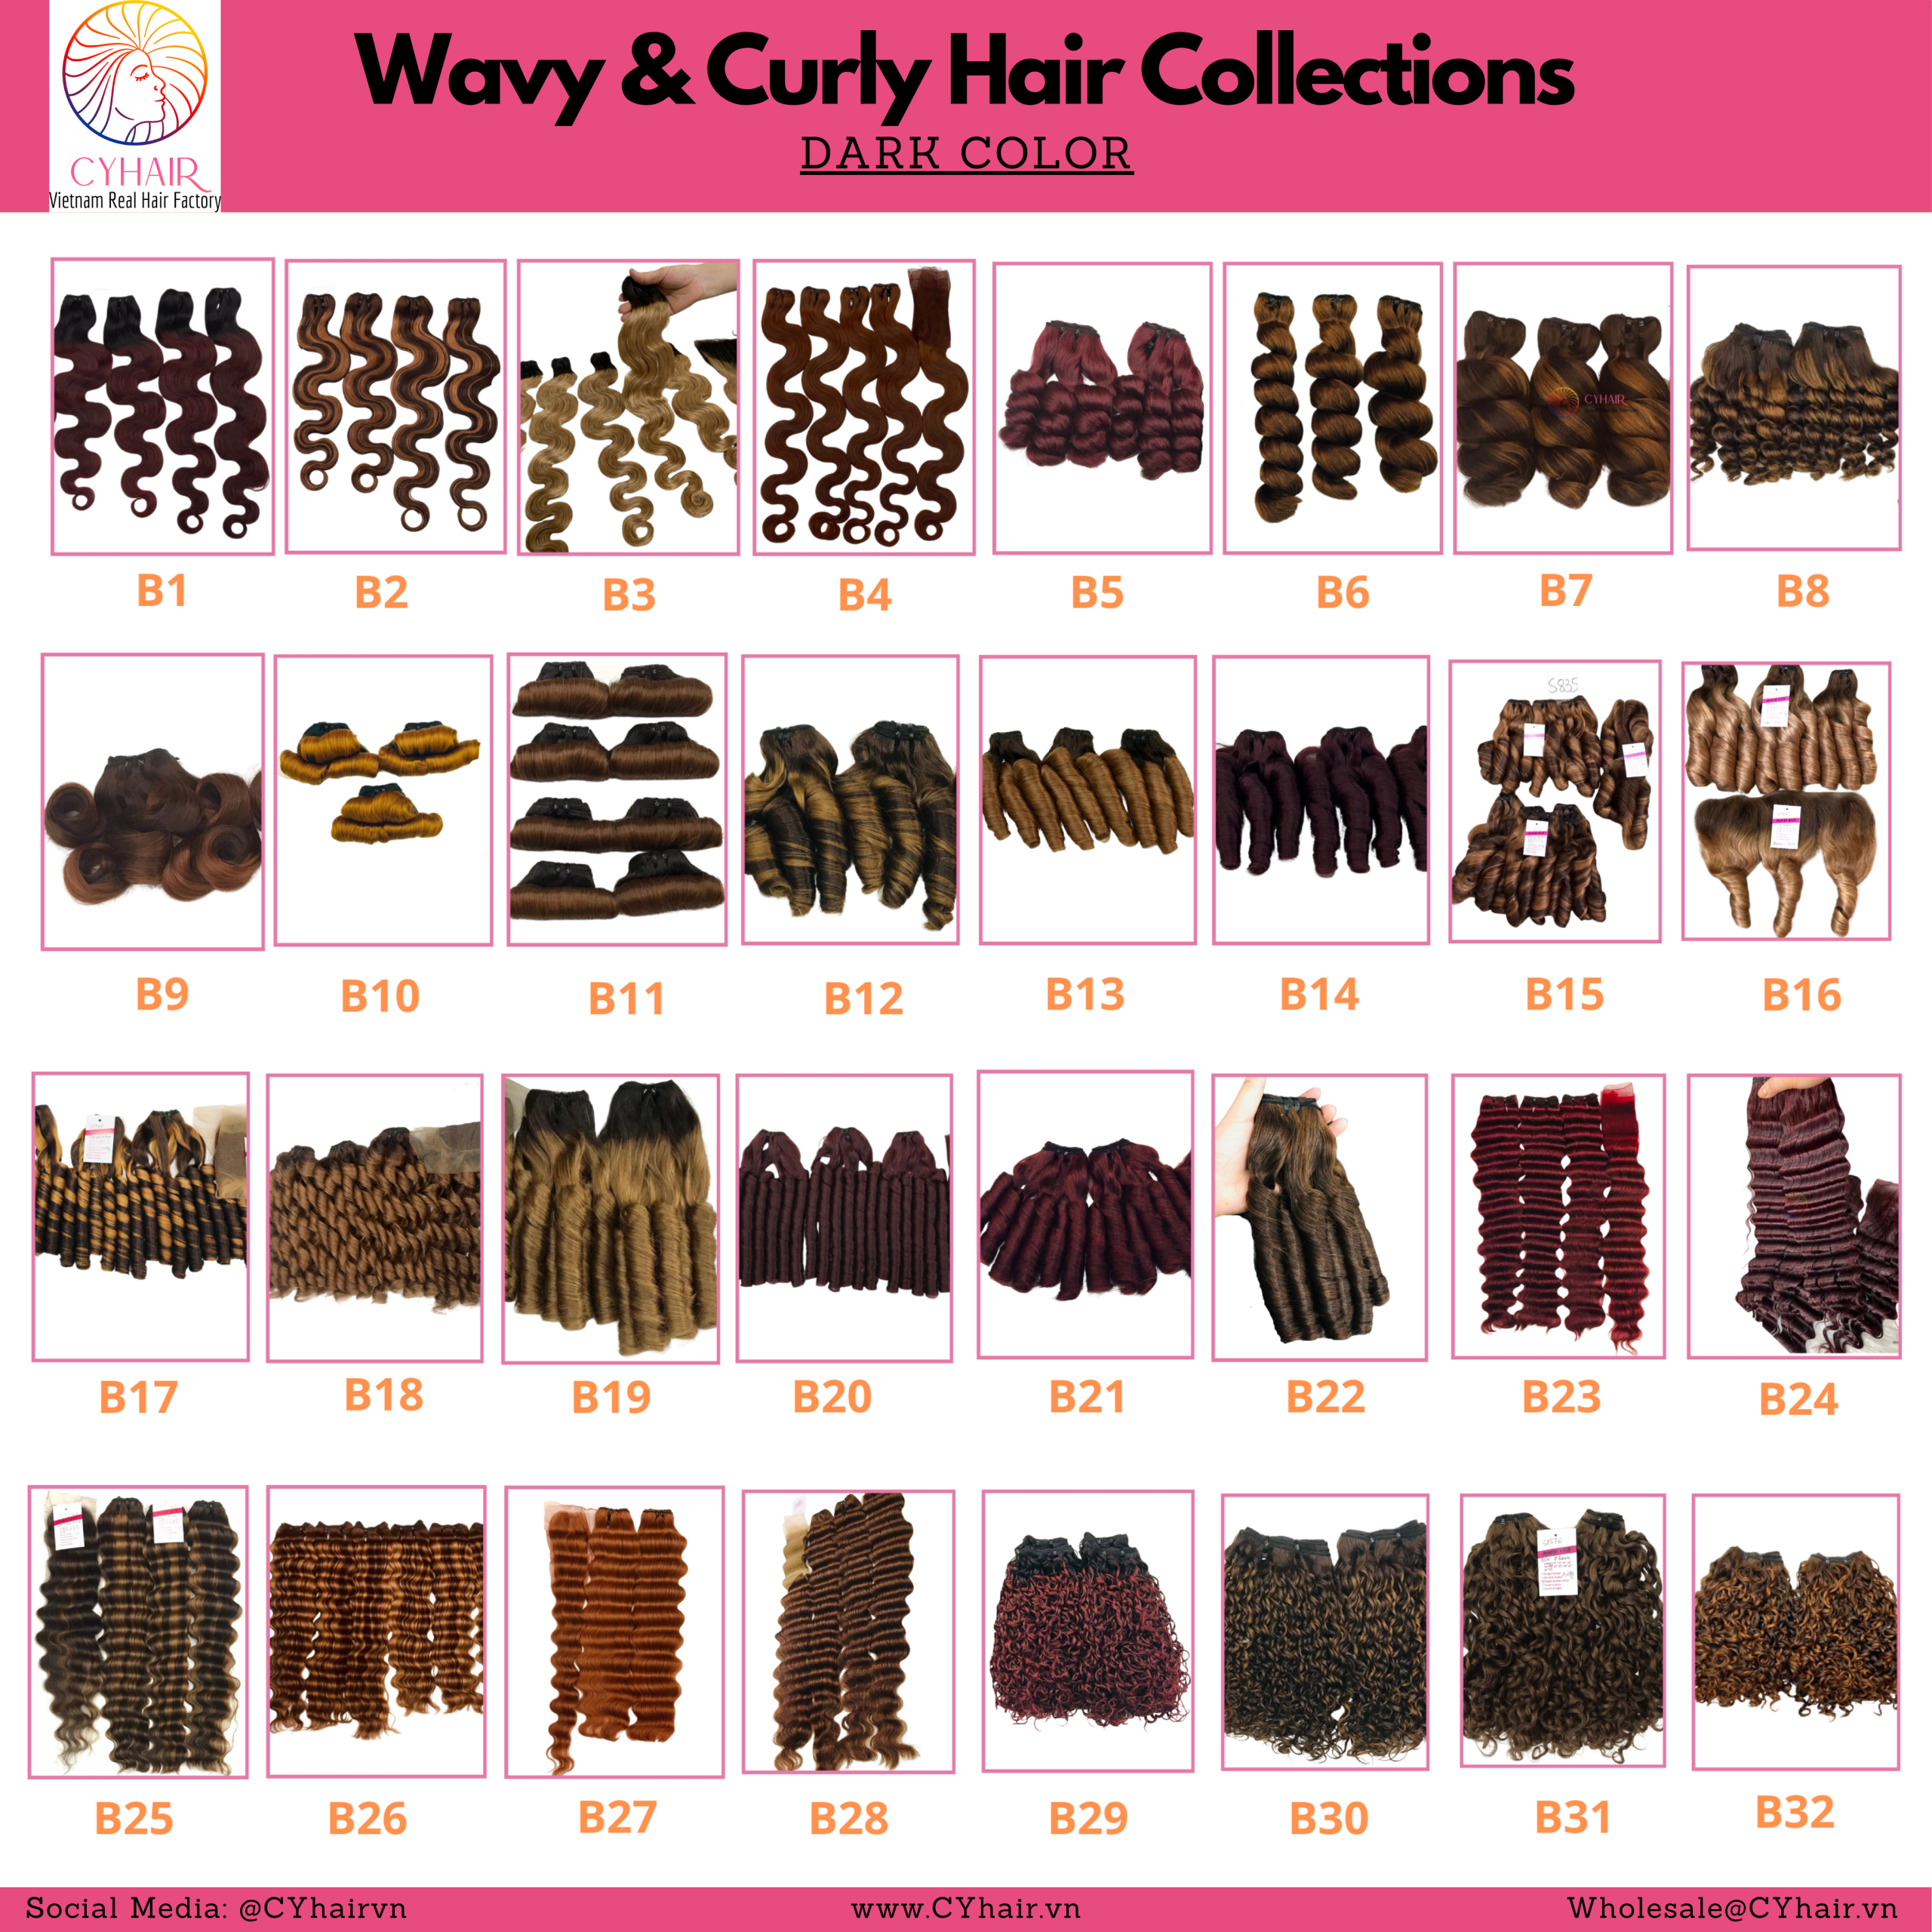 Dark Color Wavy and Curly Hair Collection